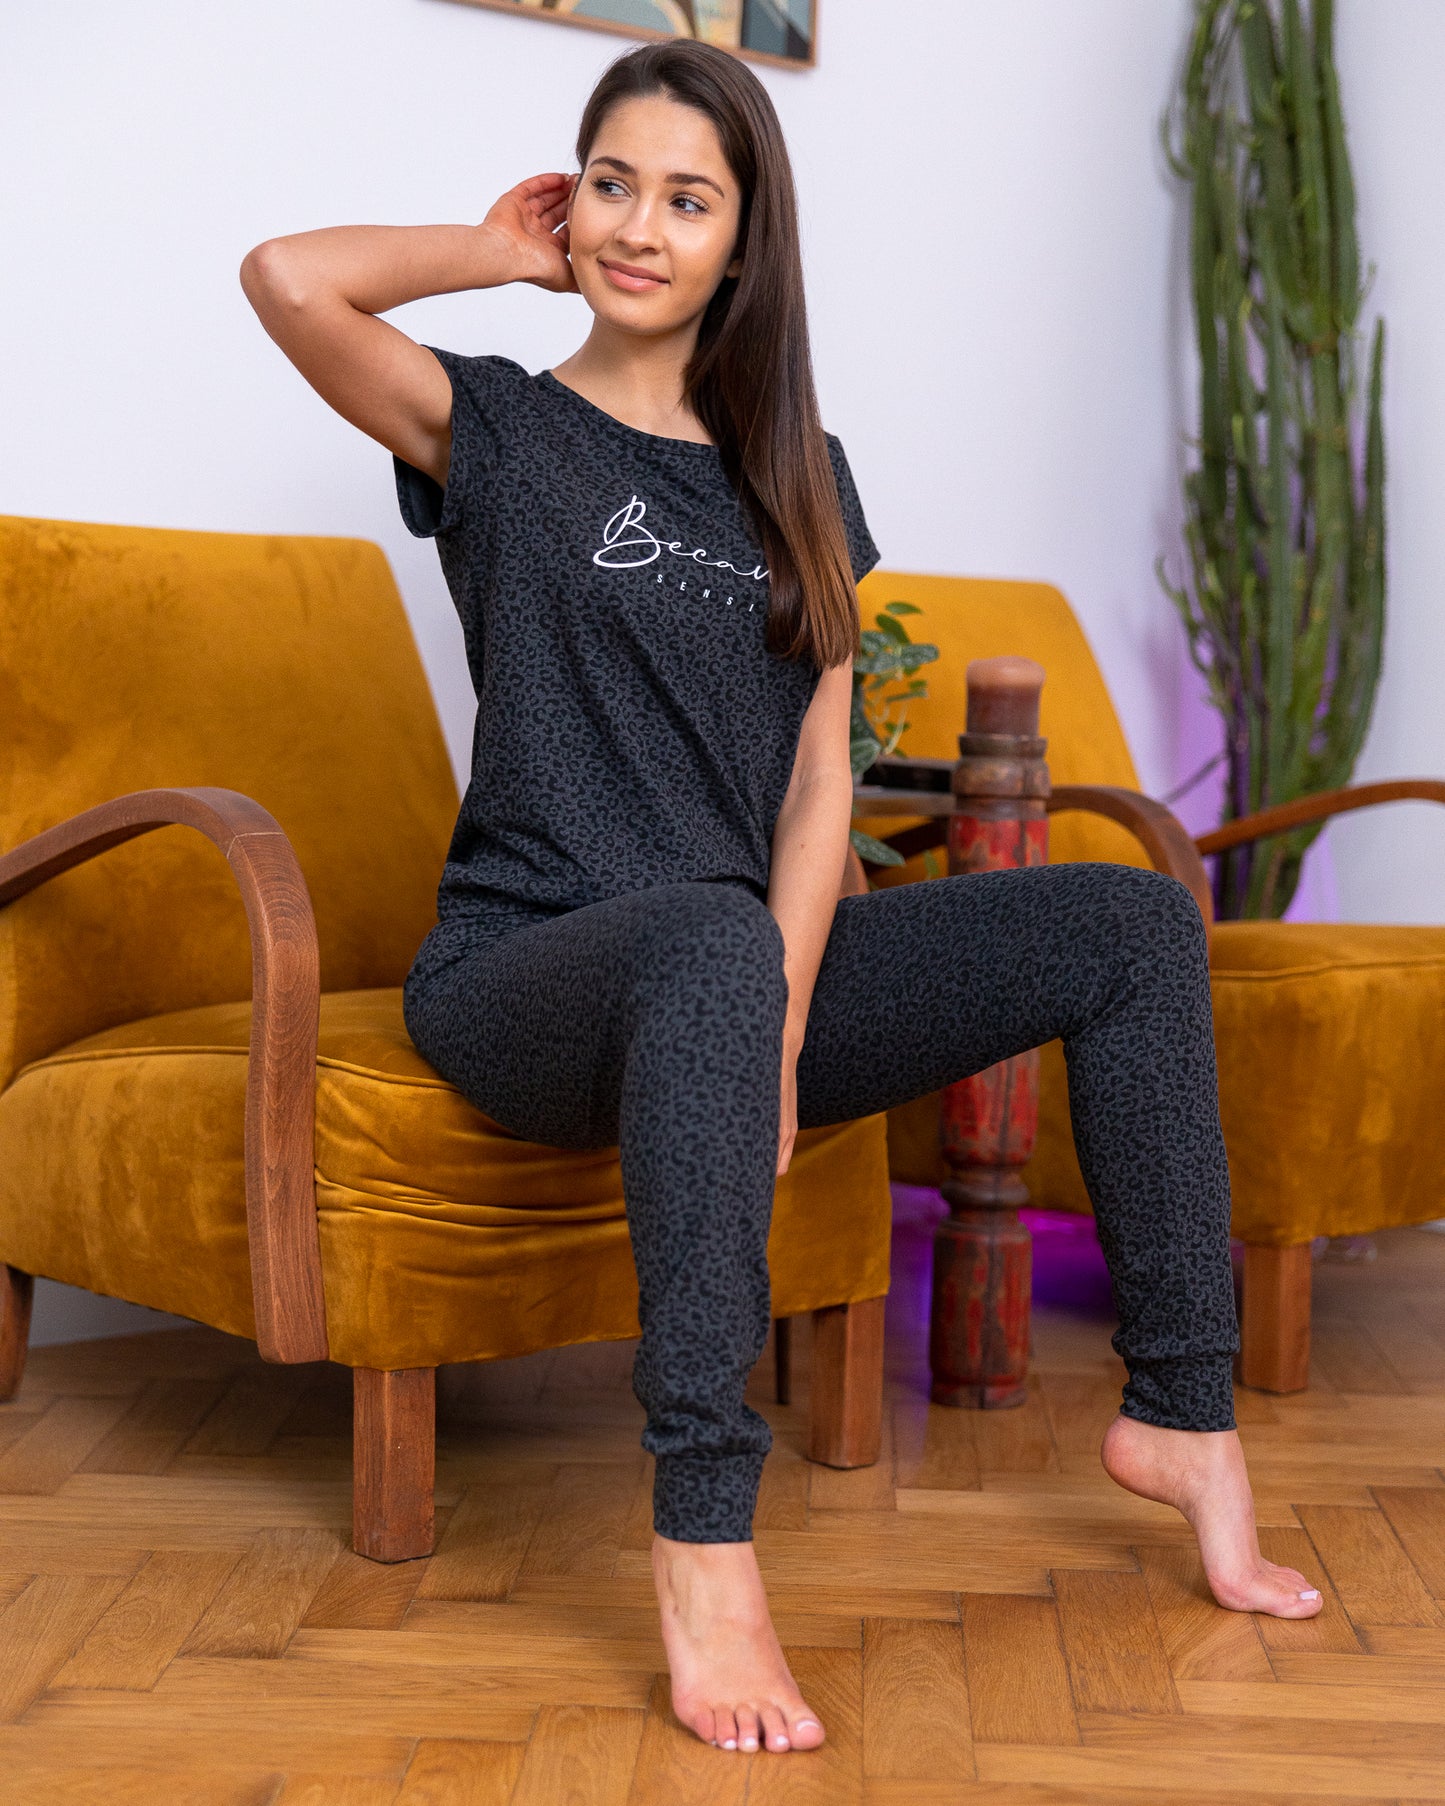 A Brunette female sitting on mustard suede loveseat wearing Two piece outfit set  Cotton-Blend Short Sleeve Top  Leopard Print Pattern  Soft Casual T-shirt  Long Pant Jogger  Cuff Ankles  Adjustable Satin Bow Tie  Sustainable pyjama set Eco-conscious lounge Wear 